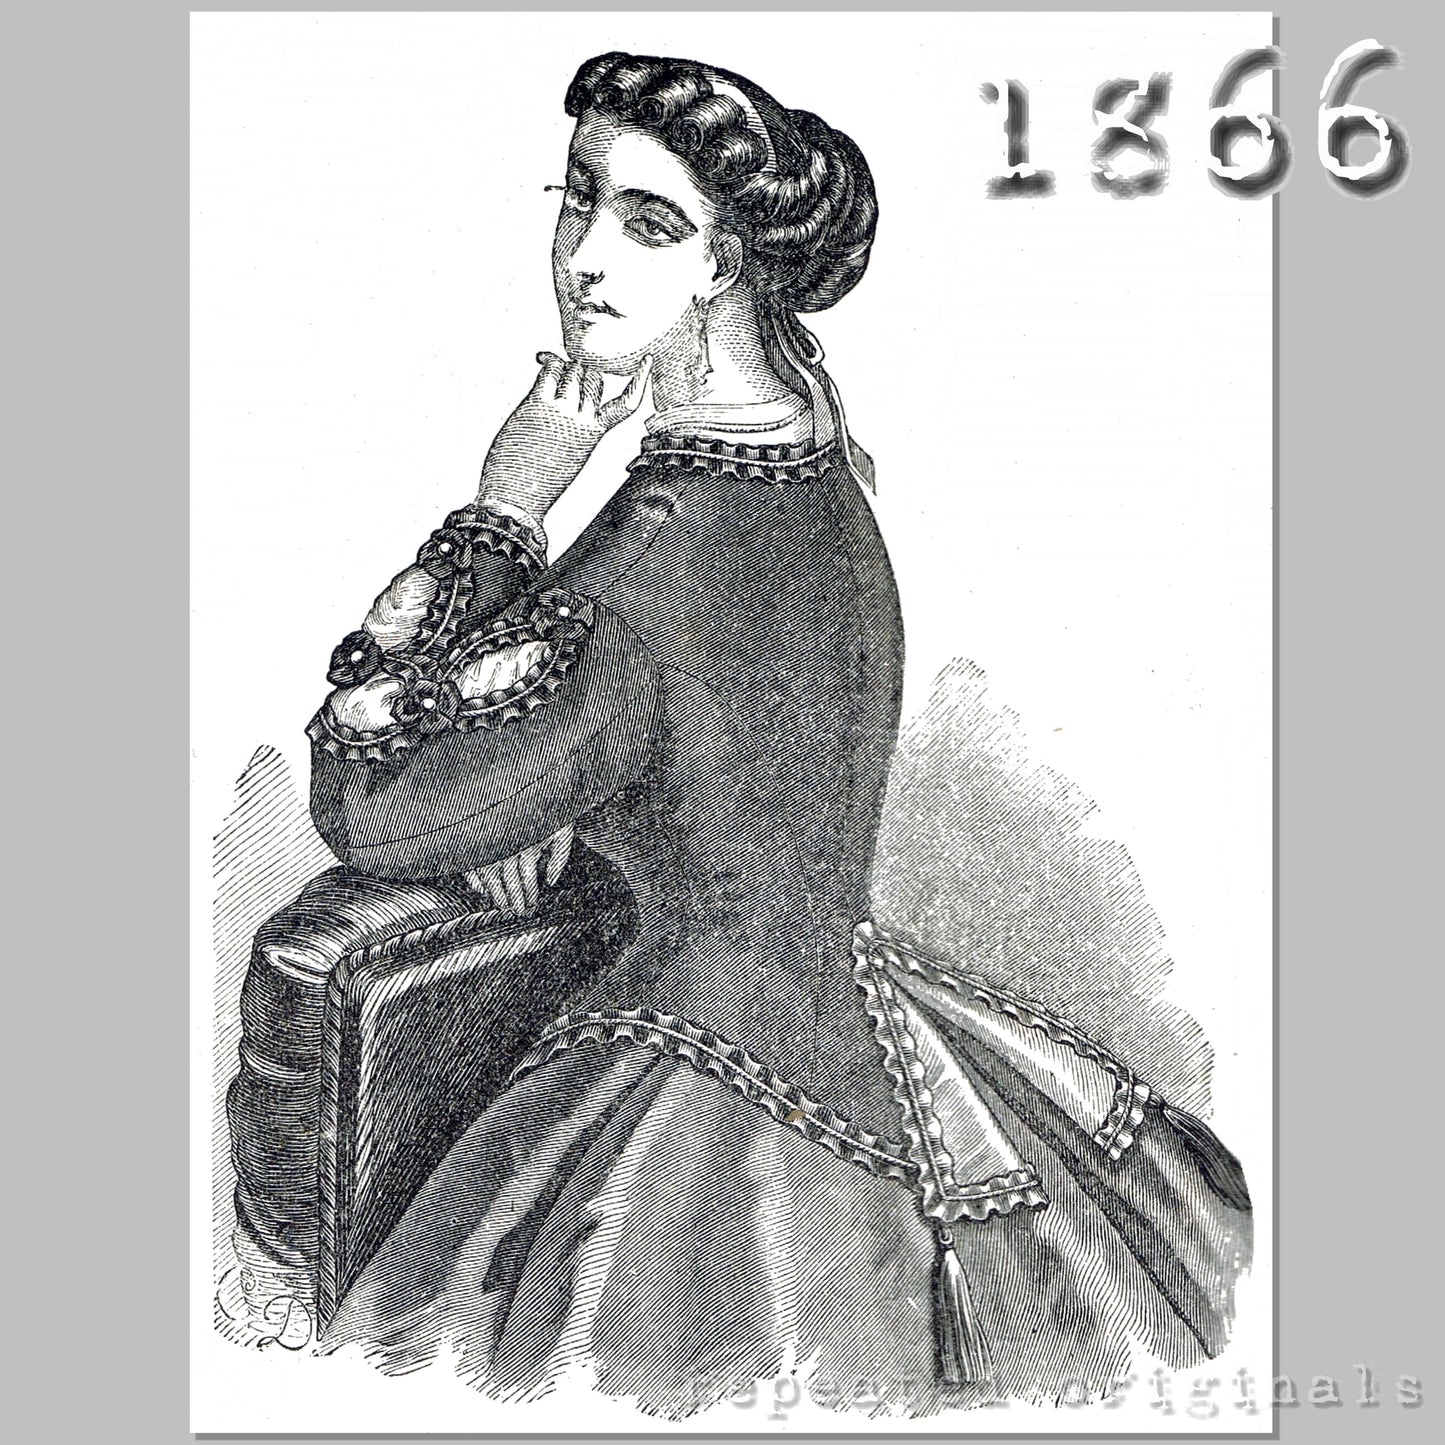 1866 Jacket with Vest Sewing Pattern - INSTANT DOWNLOAD PDF